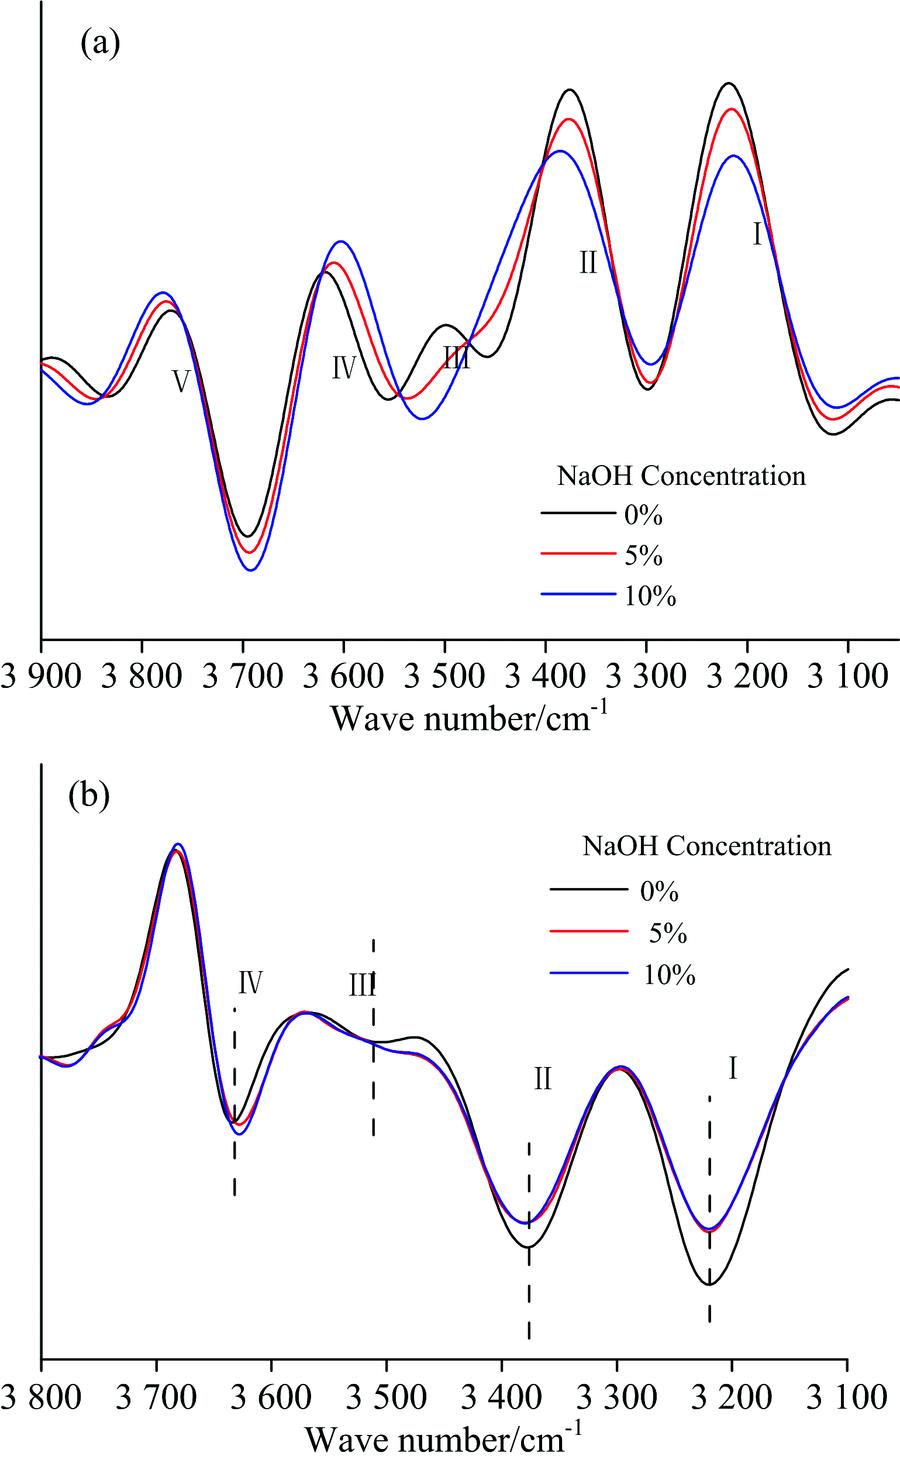 Deconvolution spectra of NaOH solutions (a) and the second derivative spectra of NaOH solutions (b)